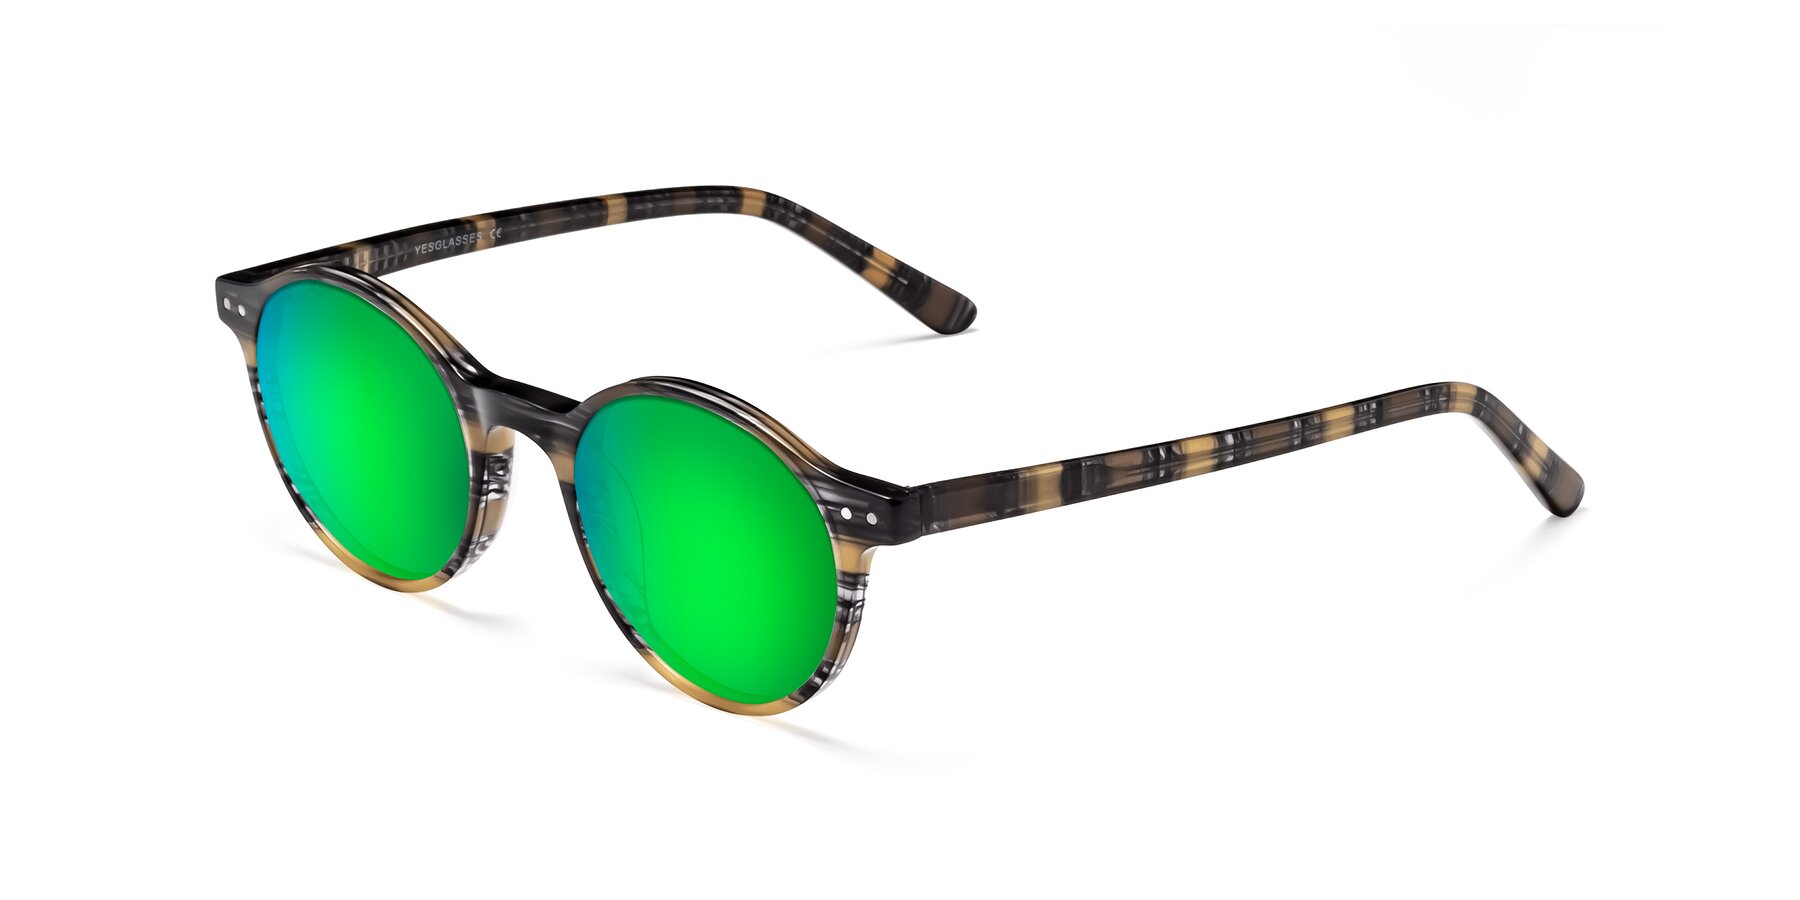 Angle of Jardi in Stripe Yellow Grey with Green Mirrored Lenses